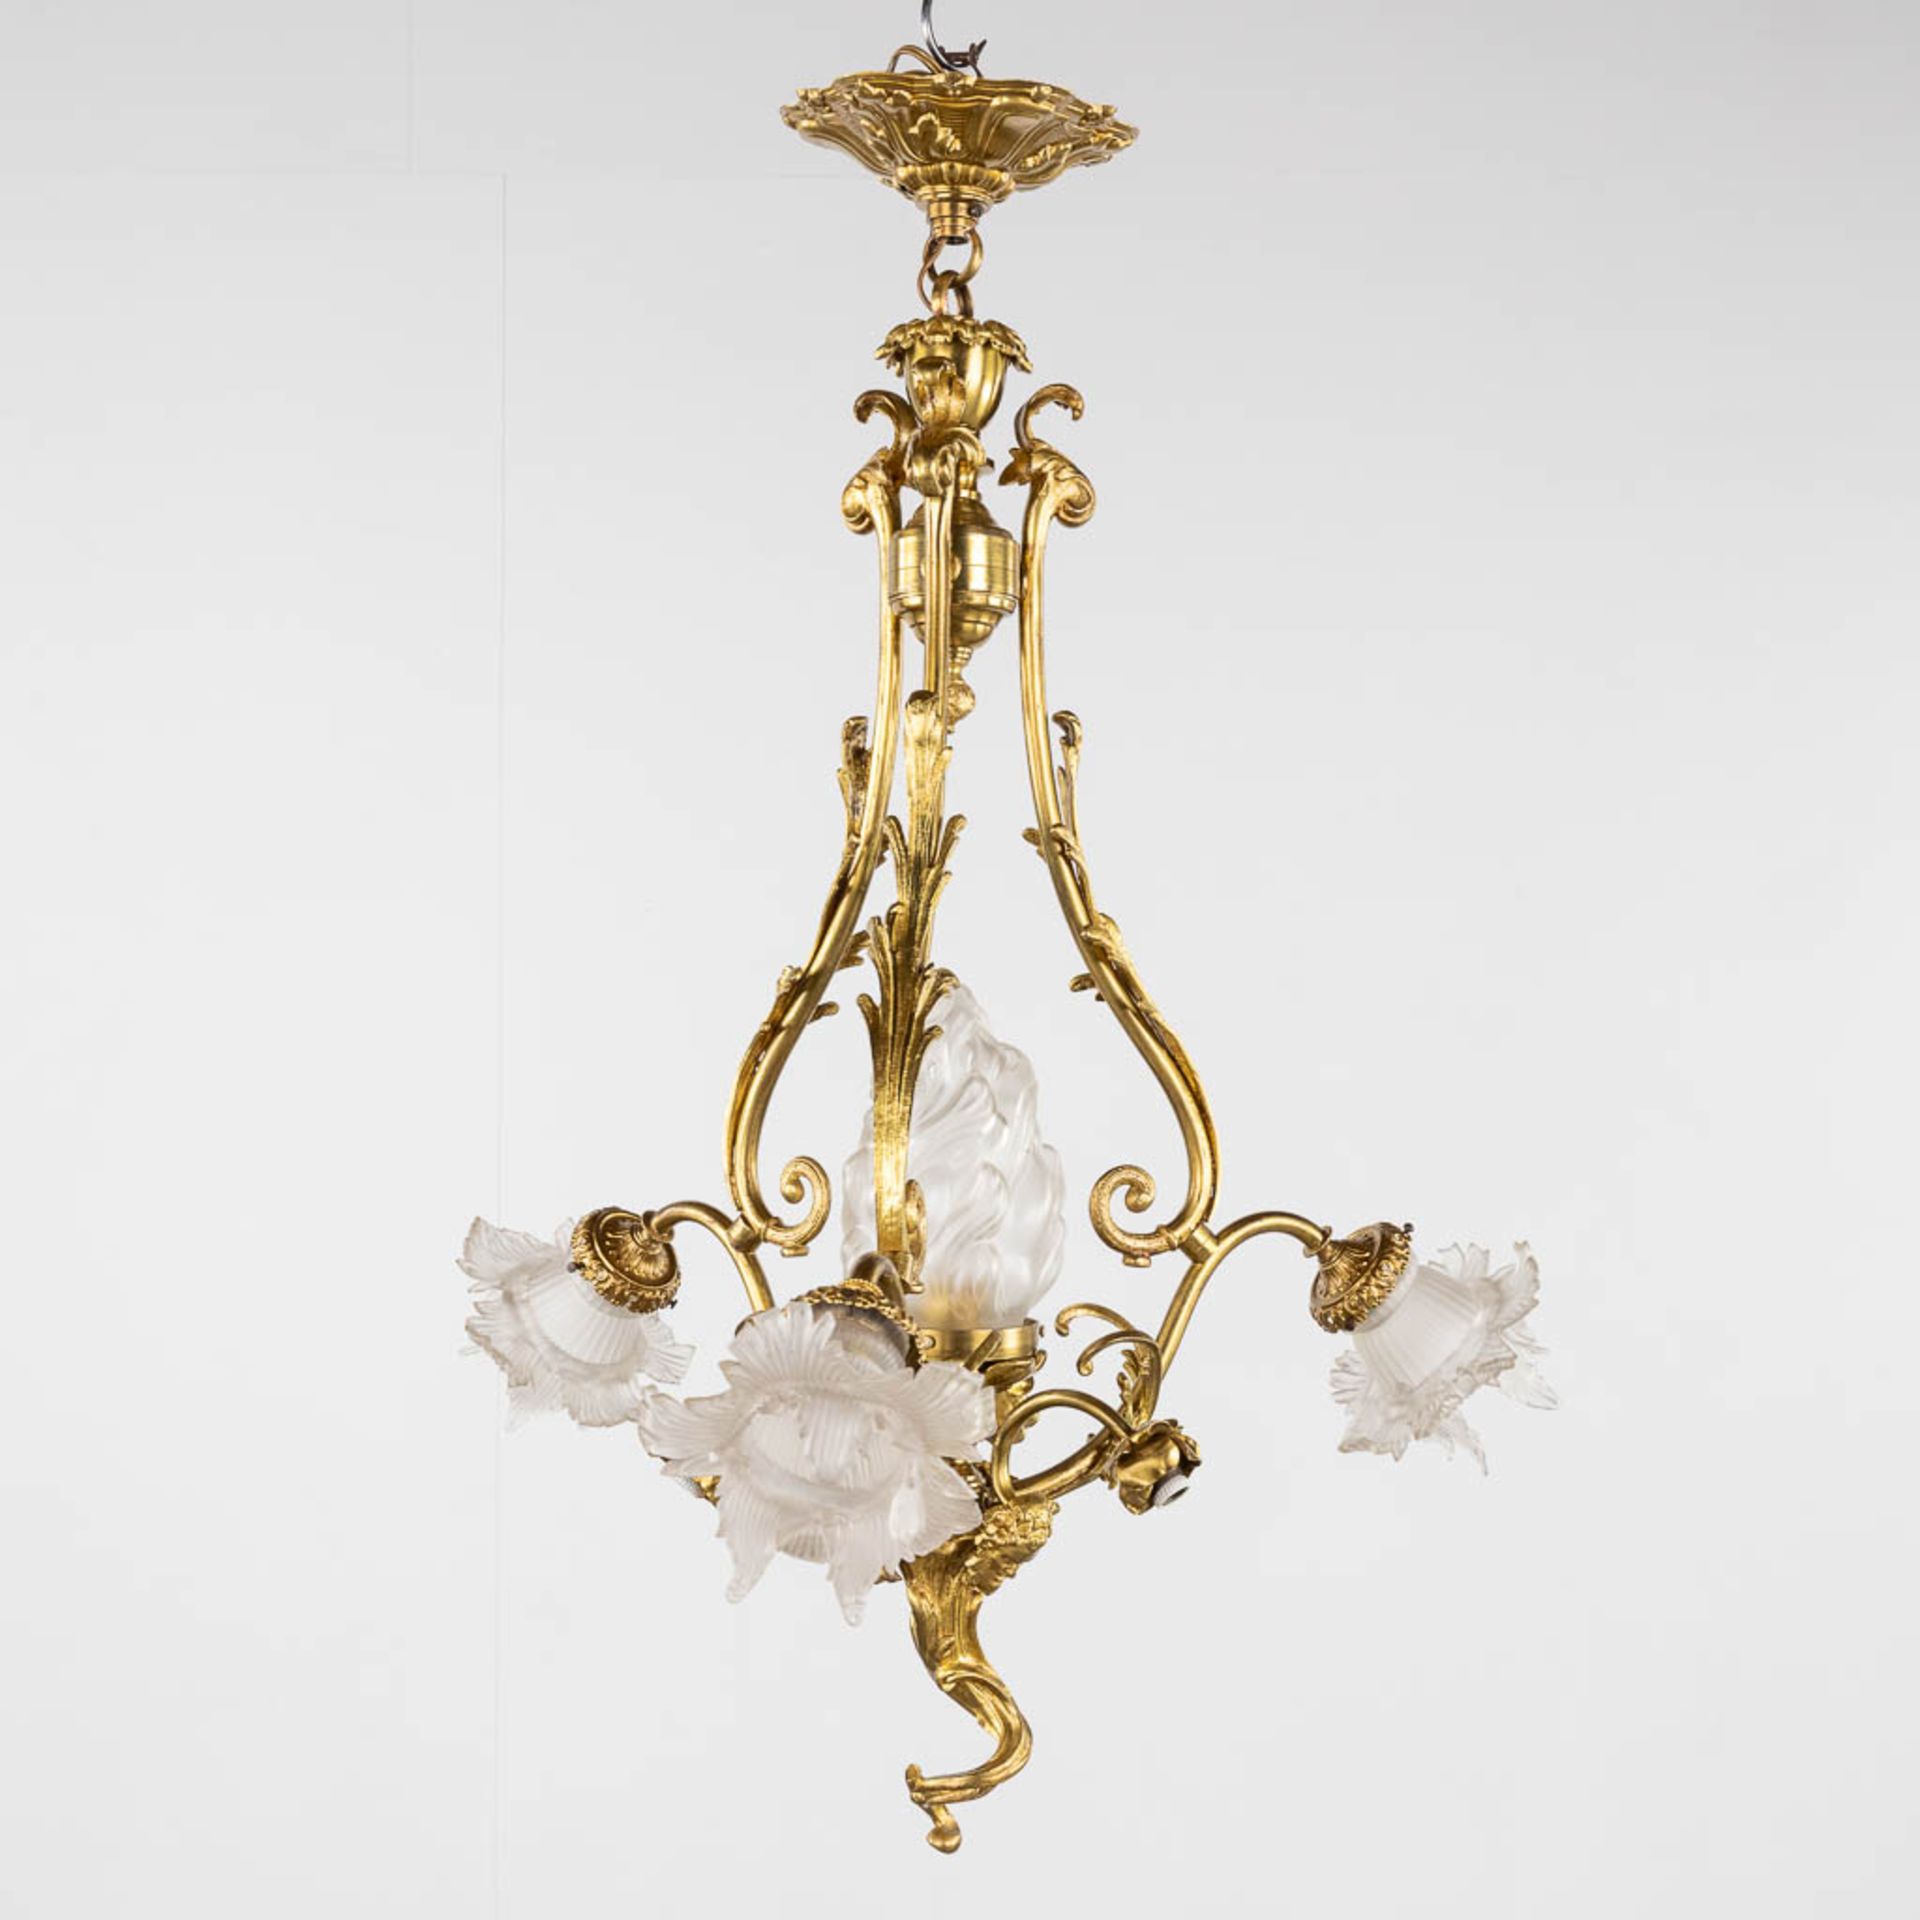 A chandelier, bronze with glass shades and a flambeau, decorated with Satyr figurines. (H:88 x D:54 - Image 3 of 13